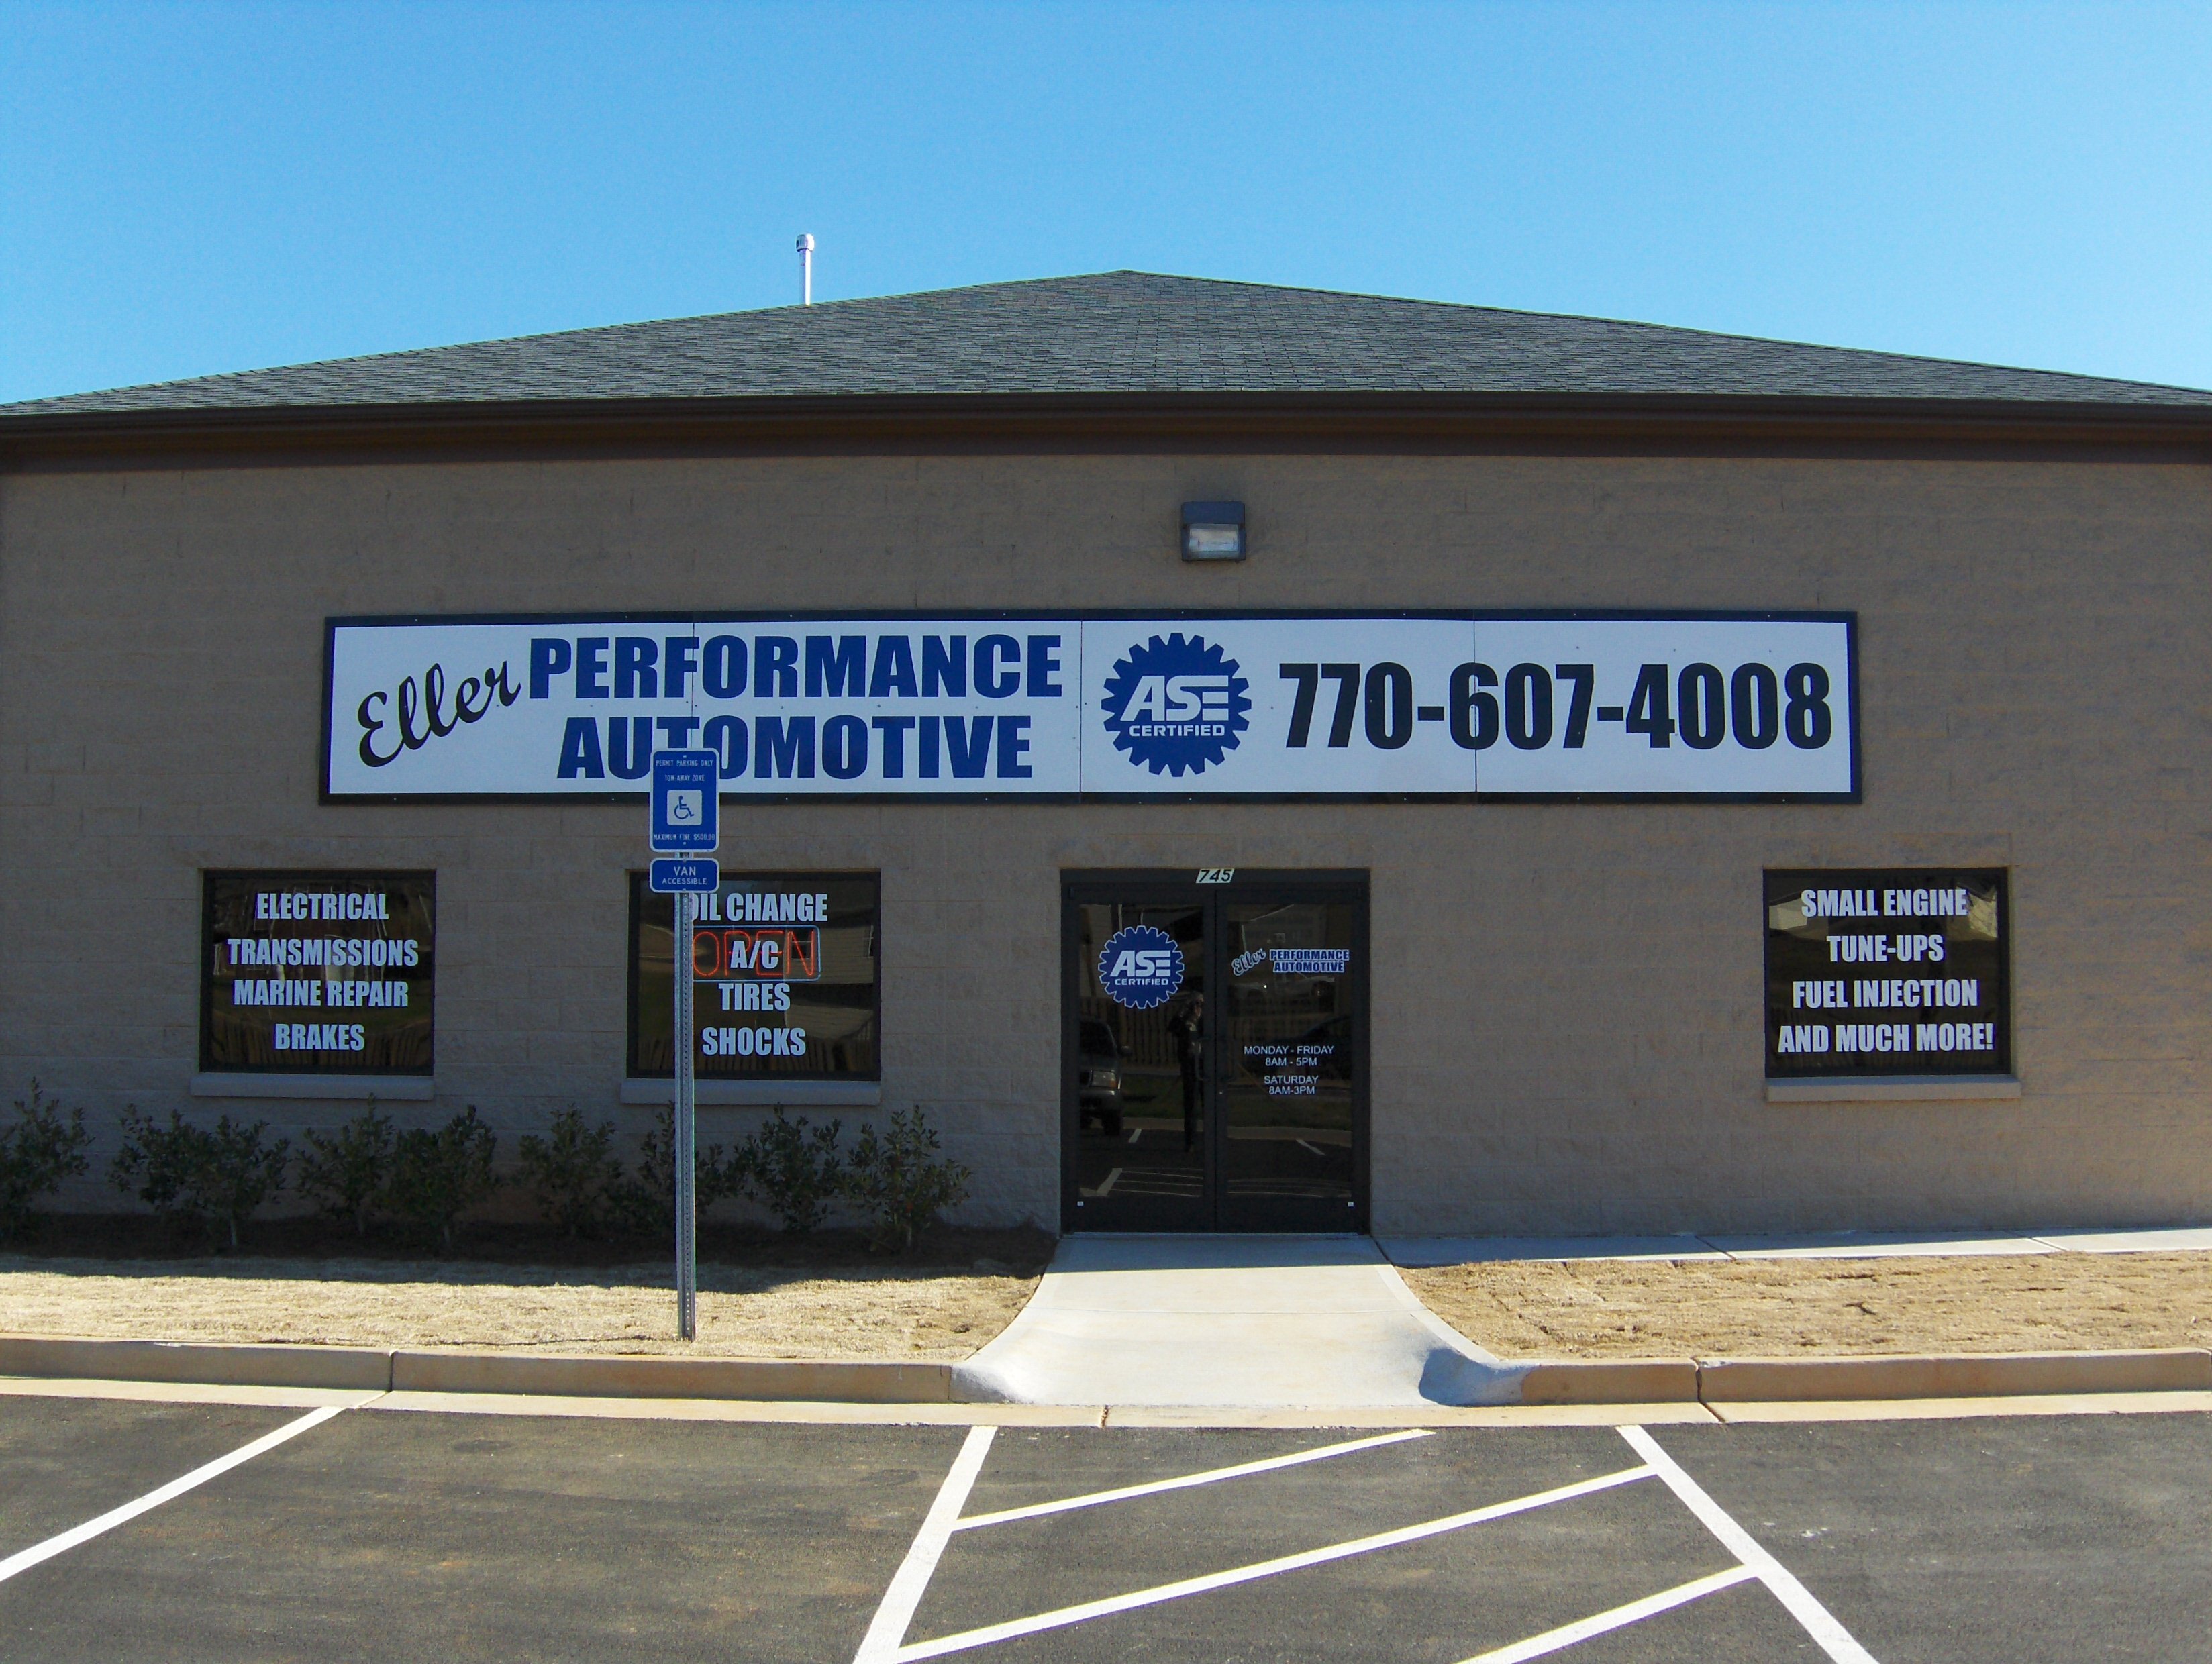 Large Business Front Signs - Automotive Repair